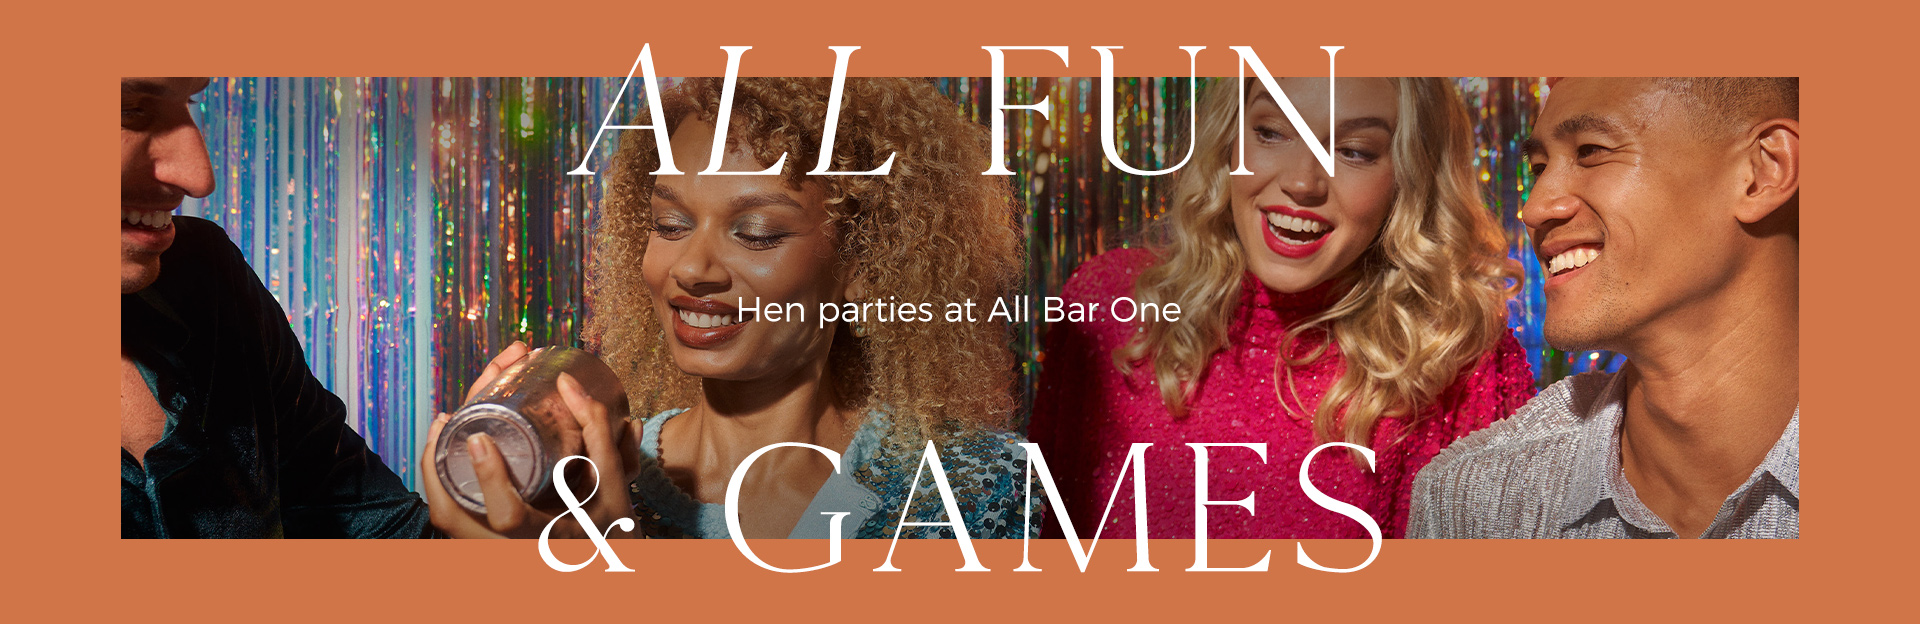 Hen parties at All Bar One Trafford Centre